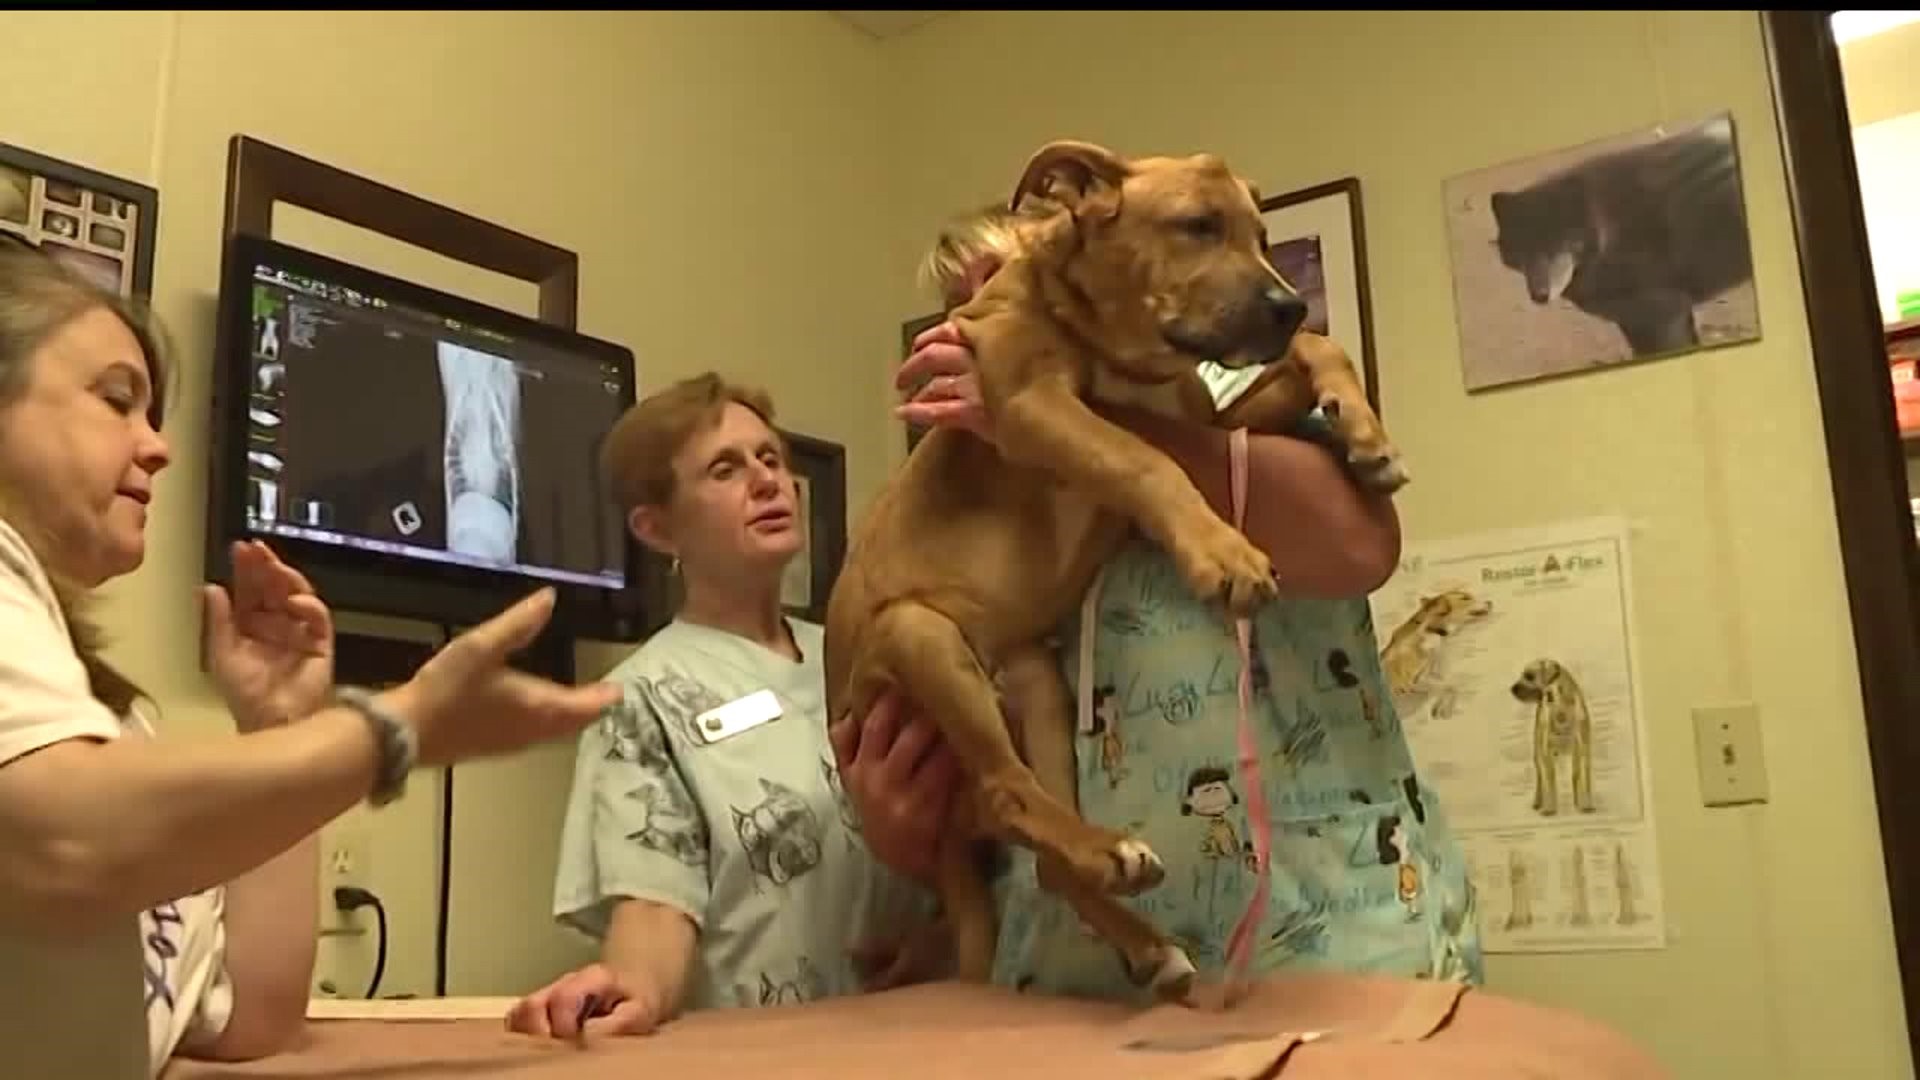 Puppy rescued from York county home; emaciated and suffering from multiple broken bones